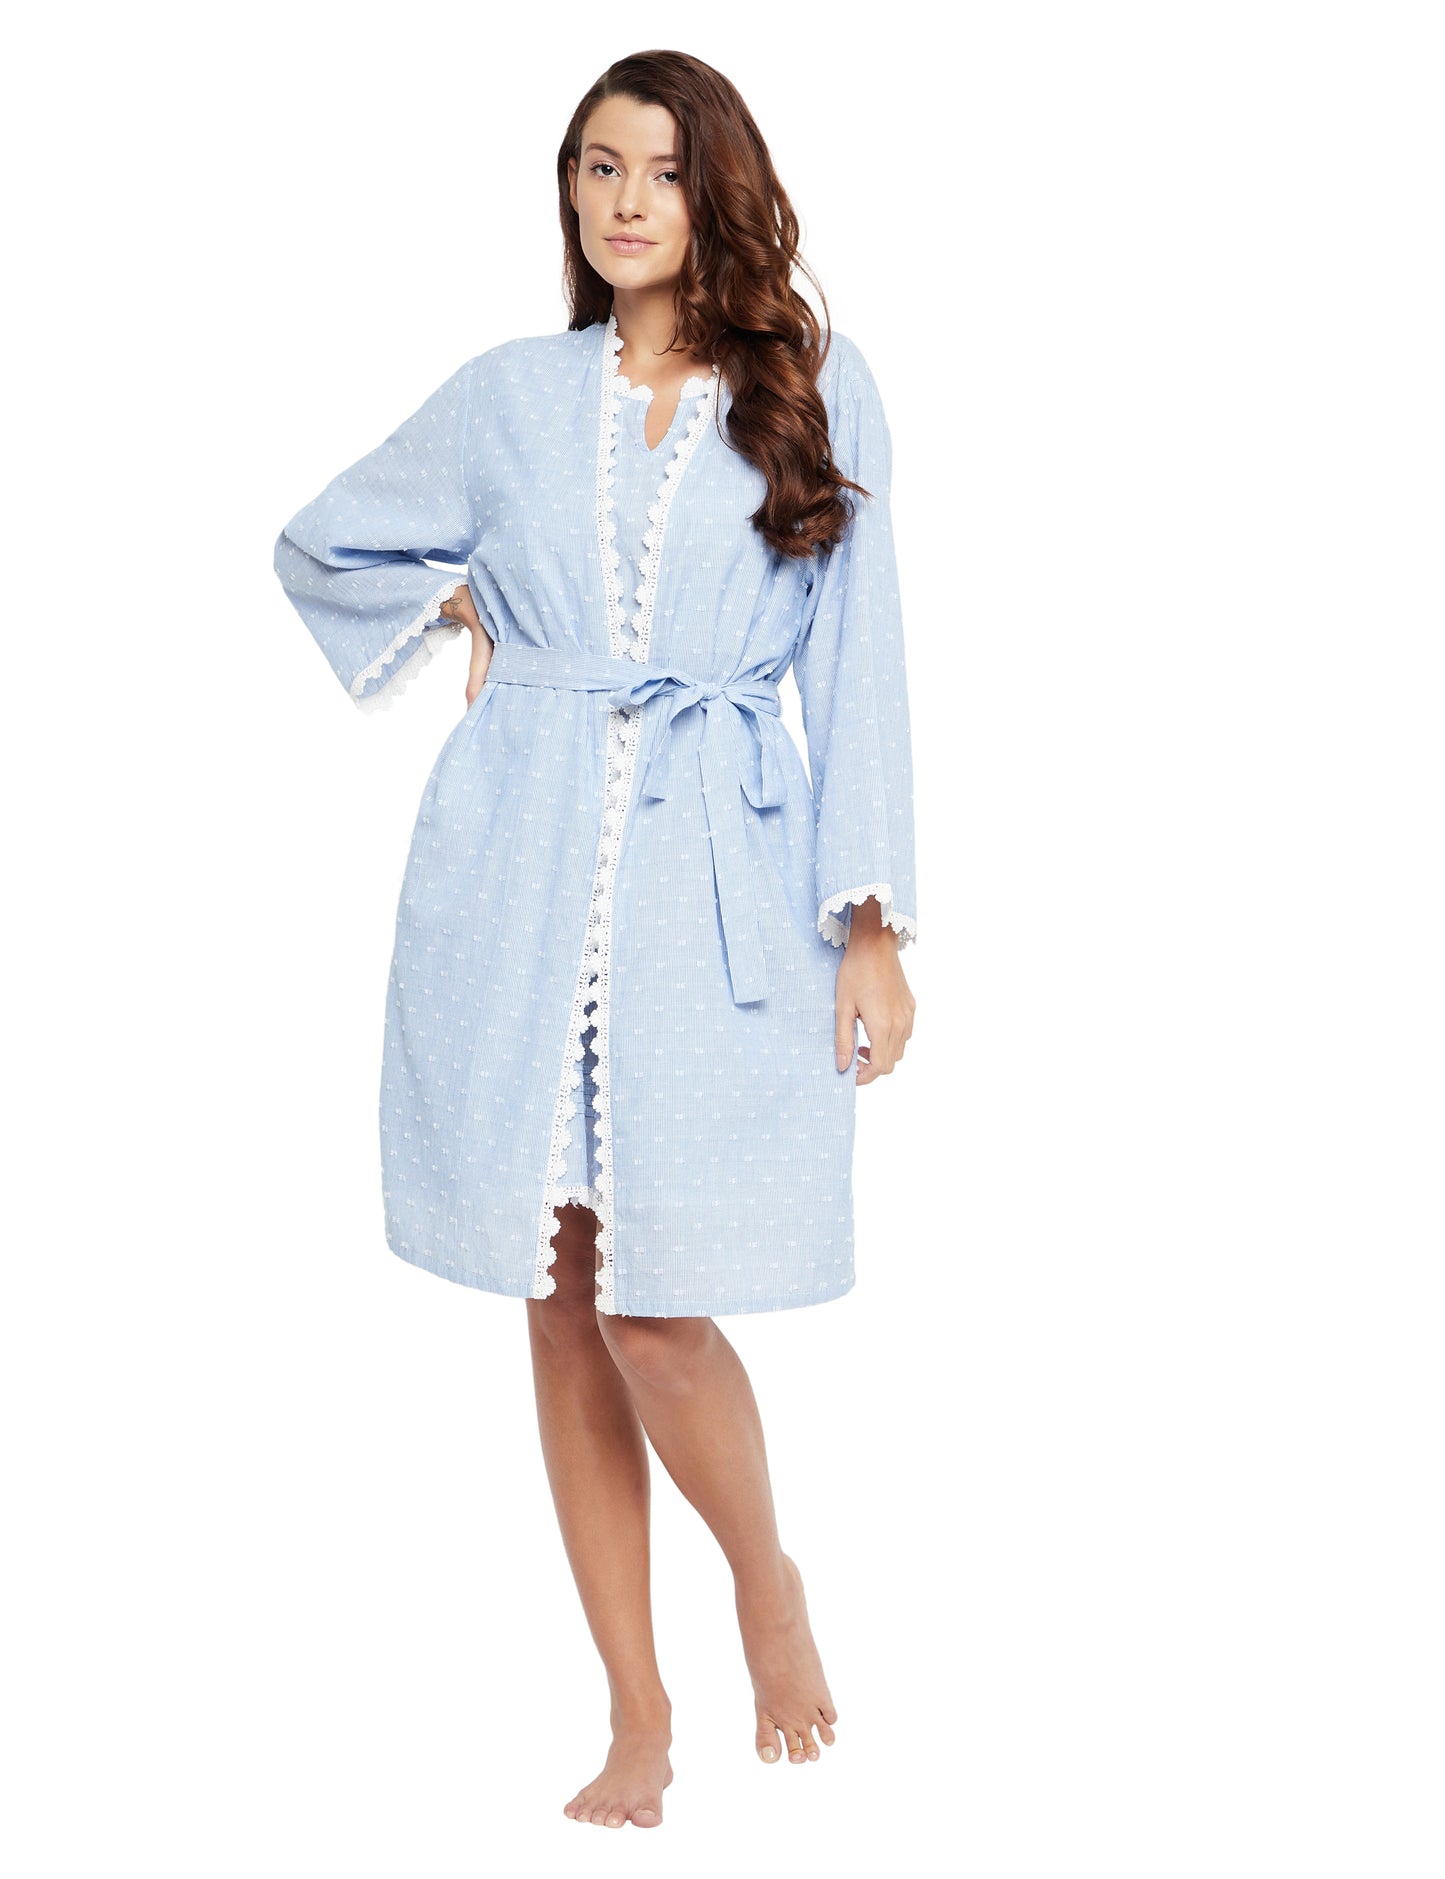 Cotton Lace Trim Robe and Dress Set of 2